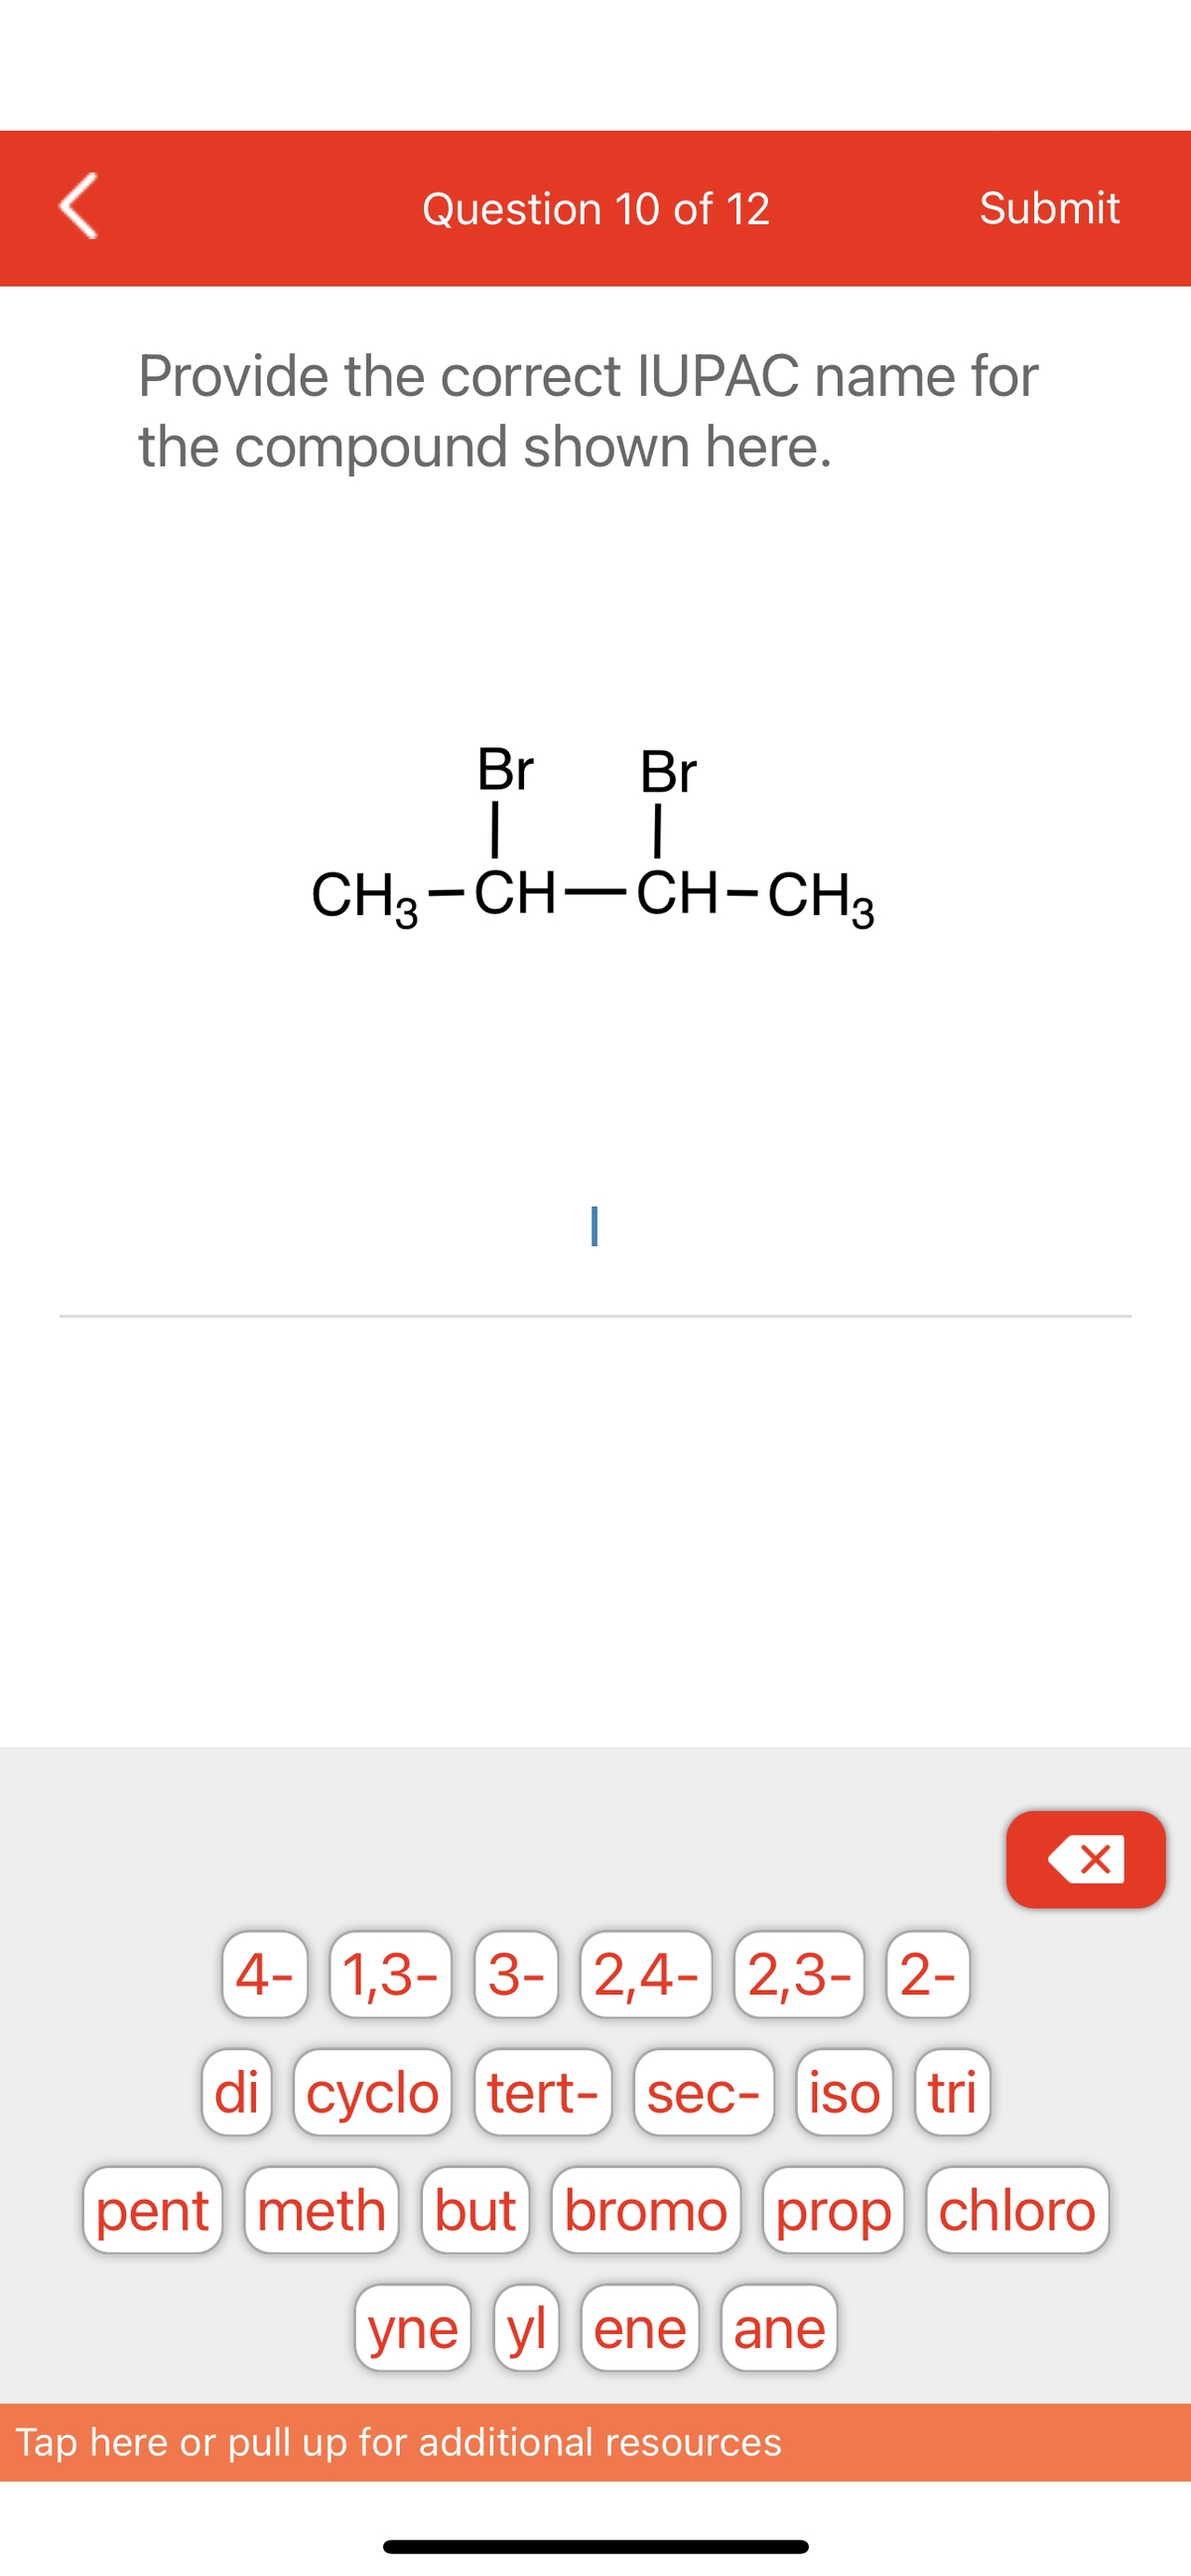 <
Question 10 of 12
Submit
Provide the correct IUPAC name for
the compound shown here.
Br Br
| 1
CH3-CH-CH-CH3
4- 1,3- 3- 2,4- 2,3- 2-
di cyclo tert- sec- iso tri
pent meth) but bromo (prop chloro
yne yl ene ane
Tap here or pull up for additional resources
X